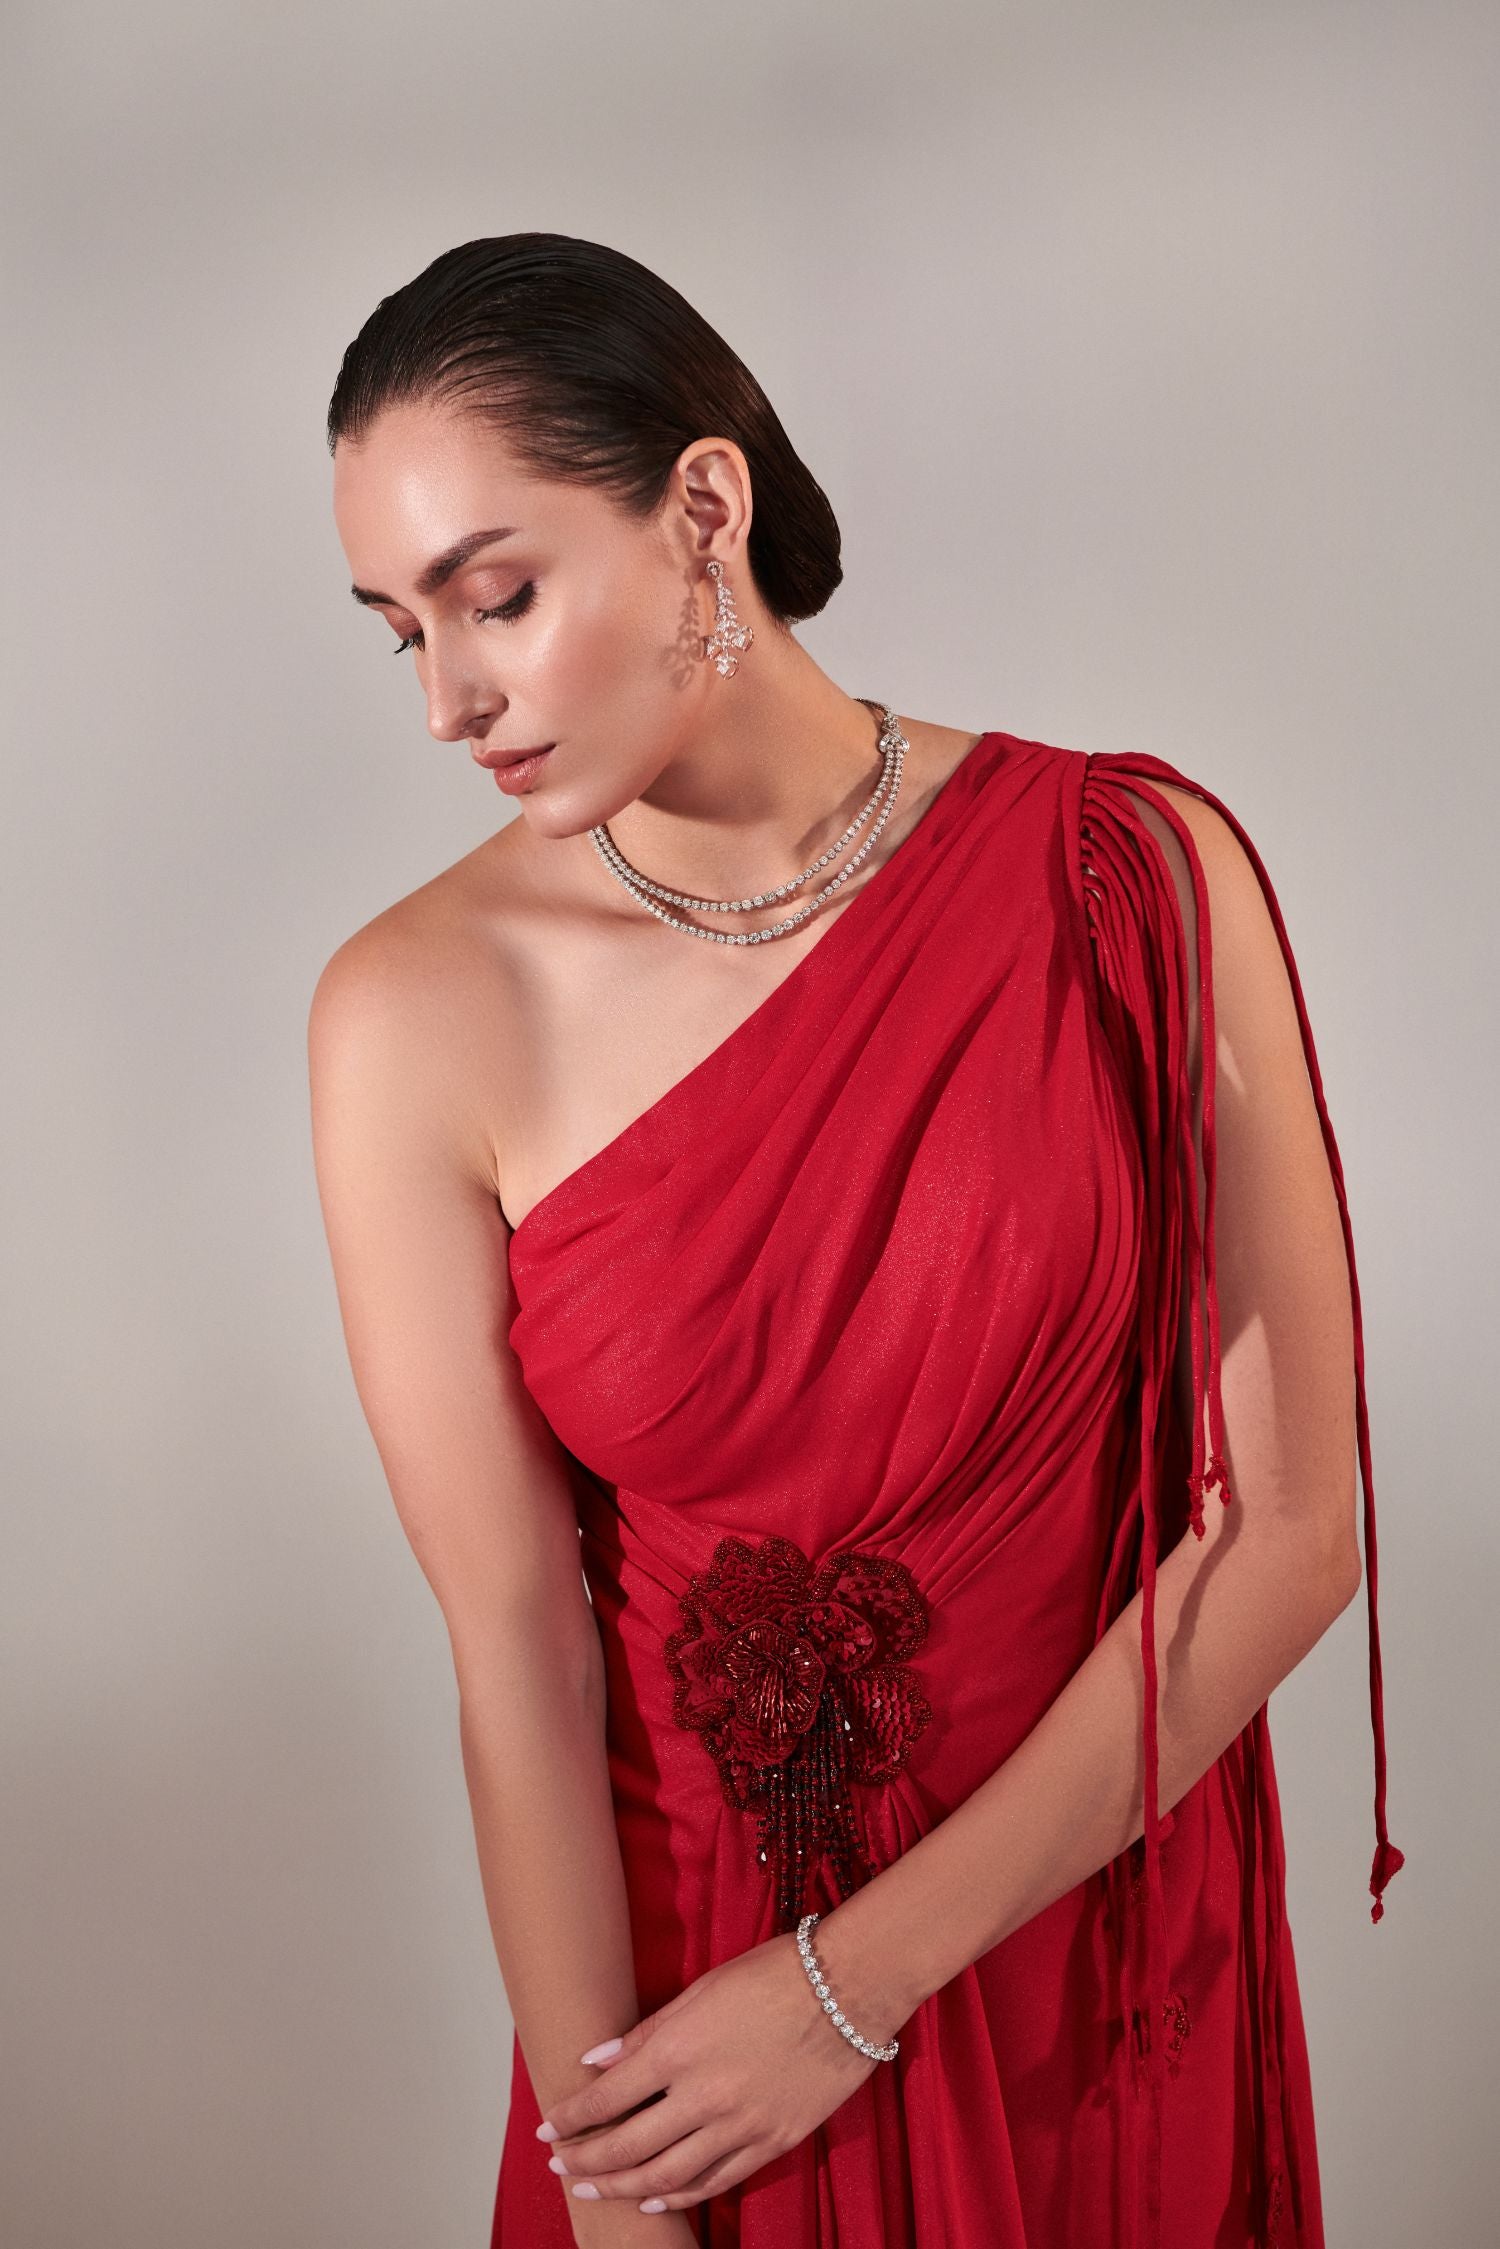 Draped Scarlet Gown